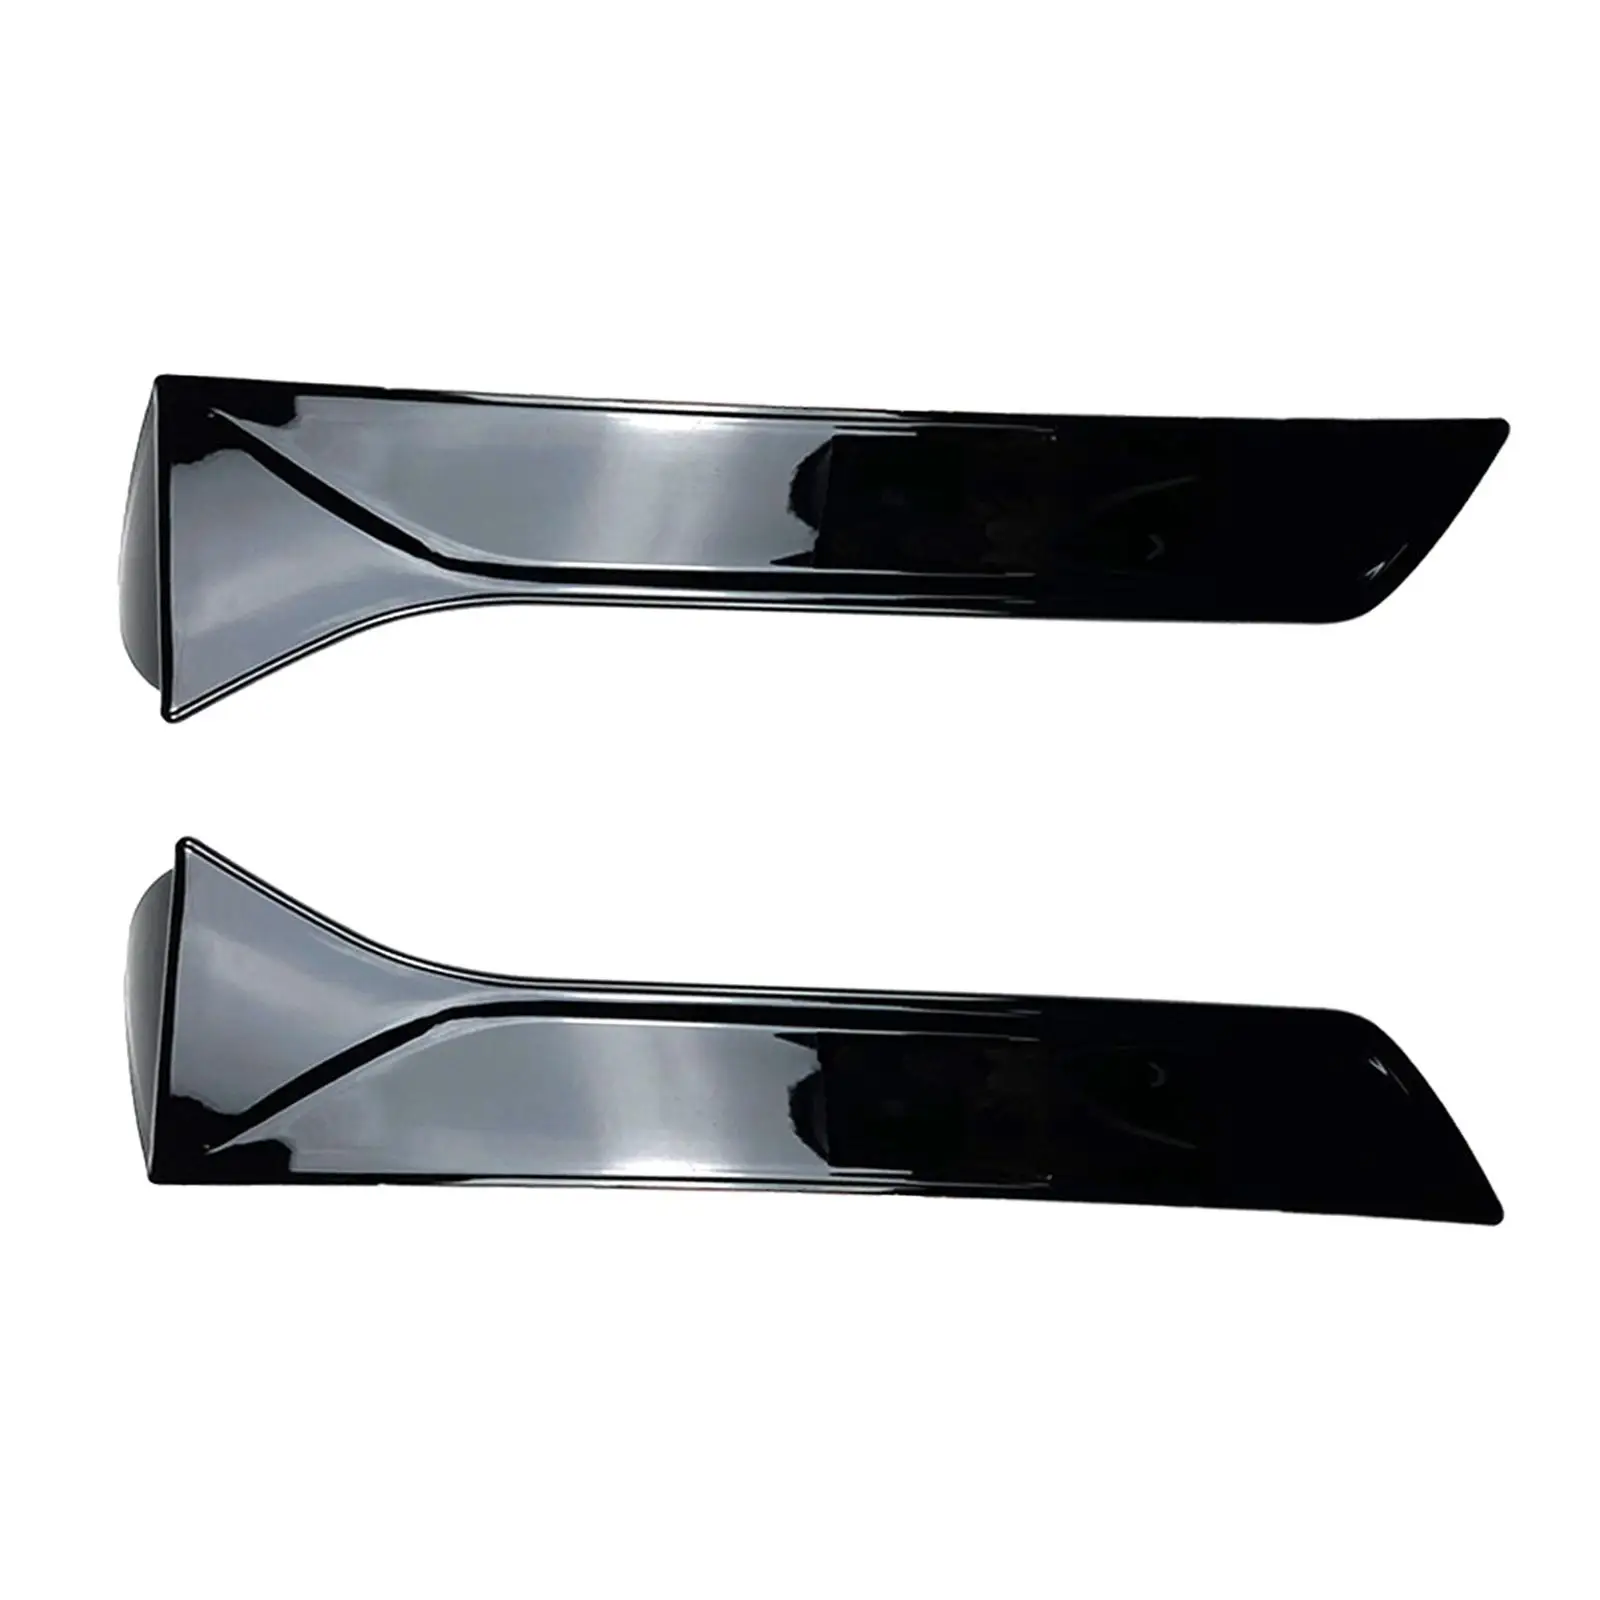 2x Car Window Spoiler, Rear Tail Flap Exterior Decor Parts Cover Trim Vertical Splitter Auto Styling Rear Wing Side Edge